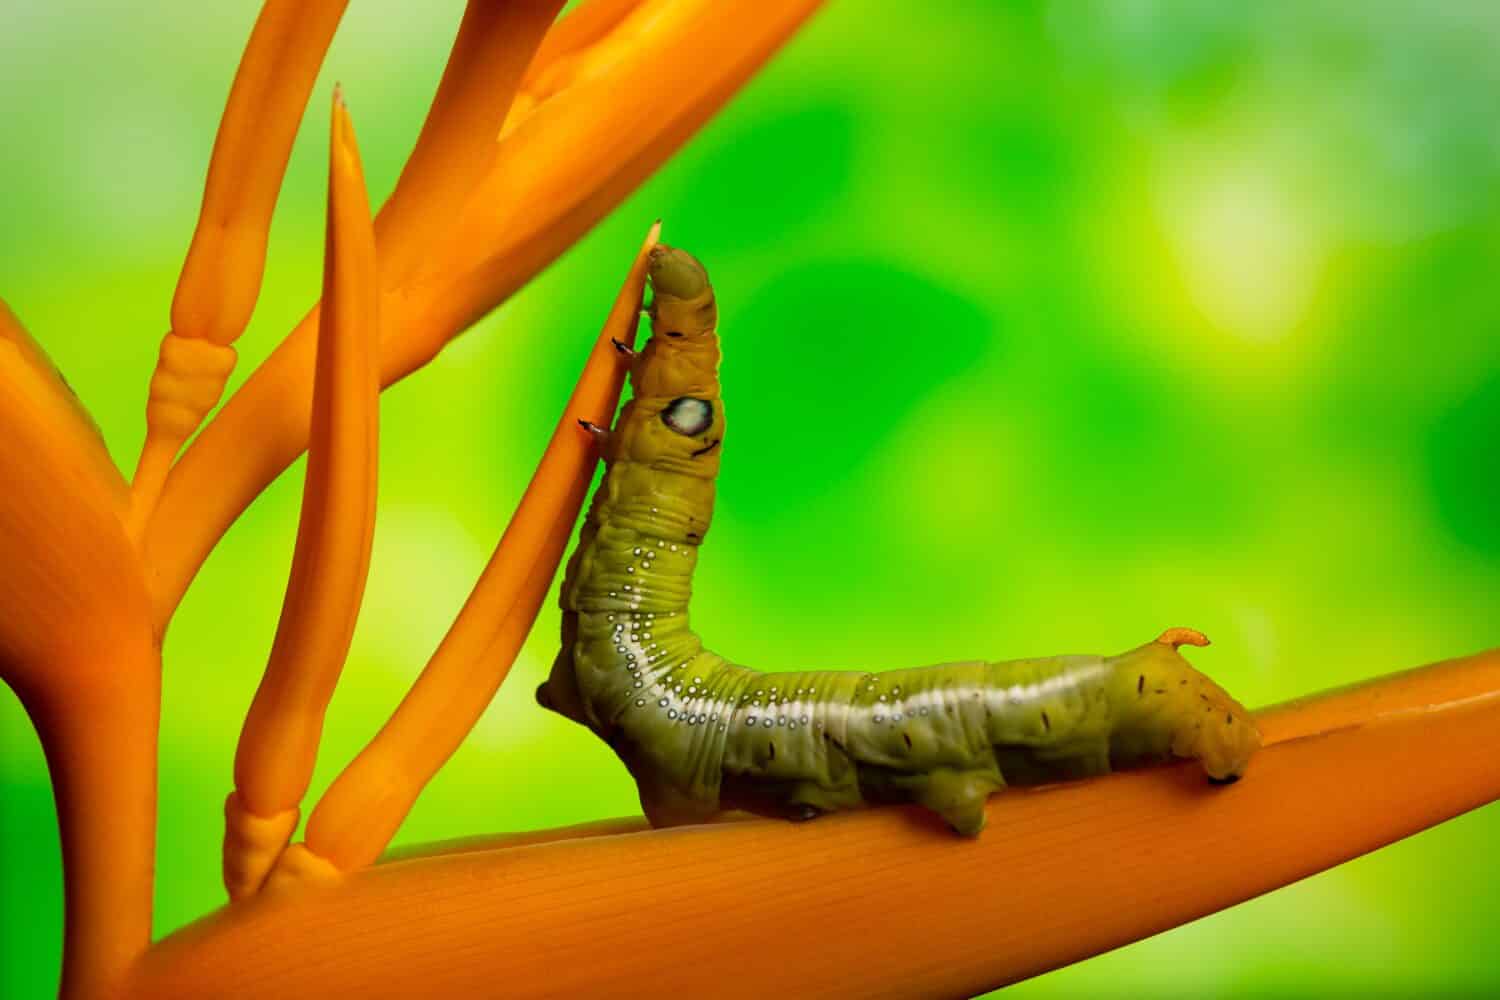 White-lined Sphinx Moth caterpillar (Hyles lineata) klimbe on yellow heliconia over green background